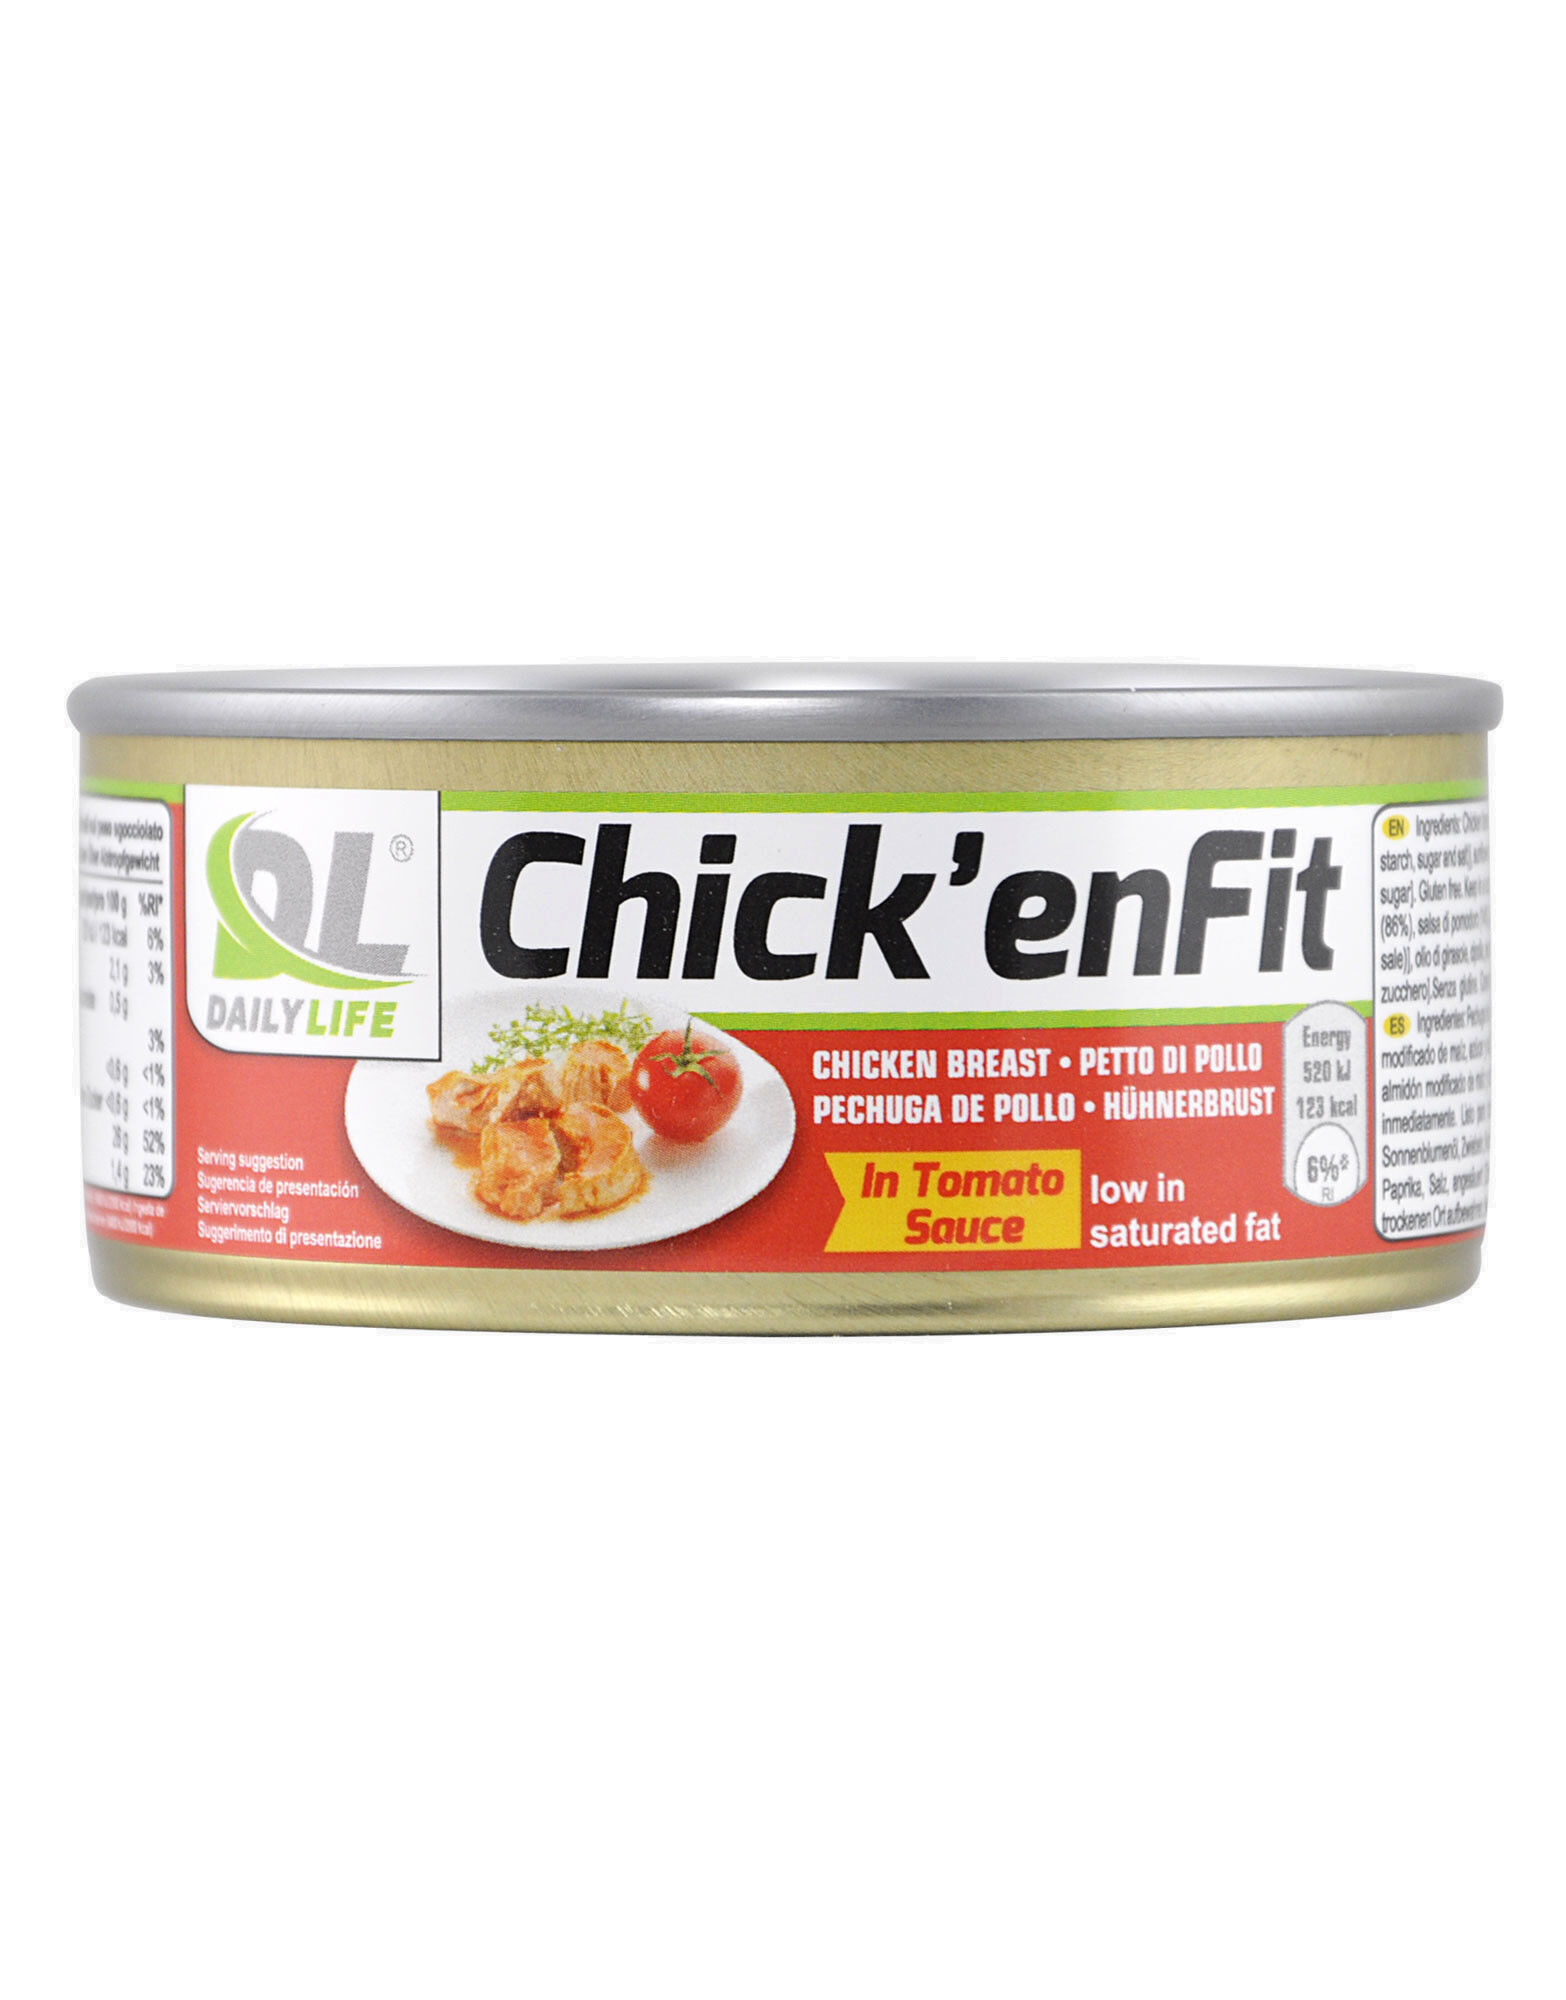 DAILY LIFE Chick'Enfit In Tomato Sauce 155 Grammi